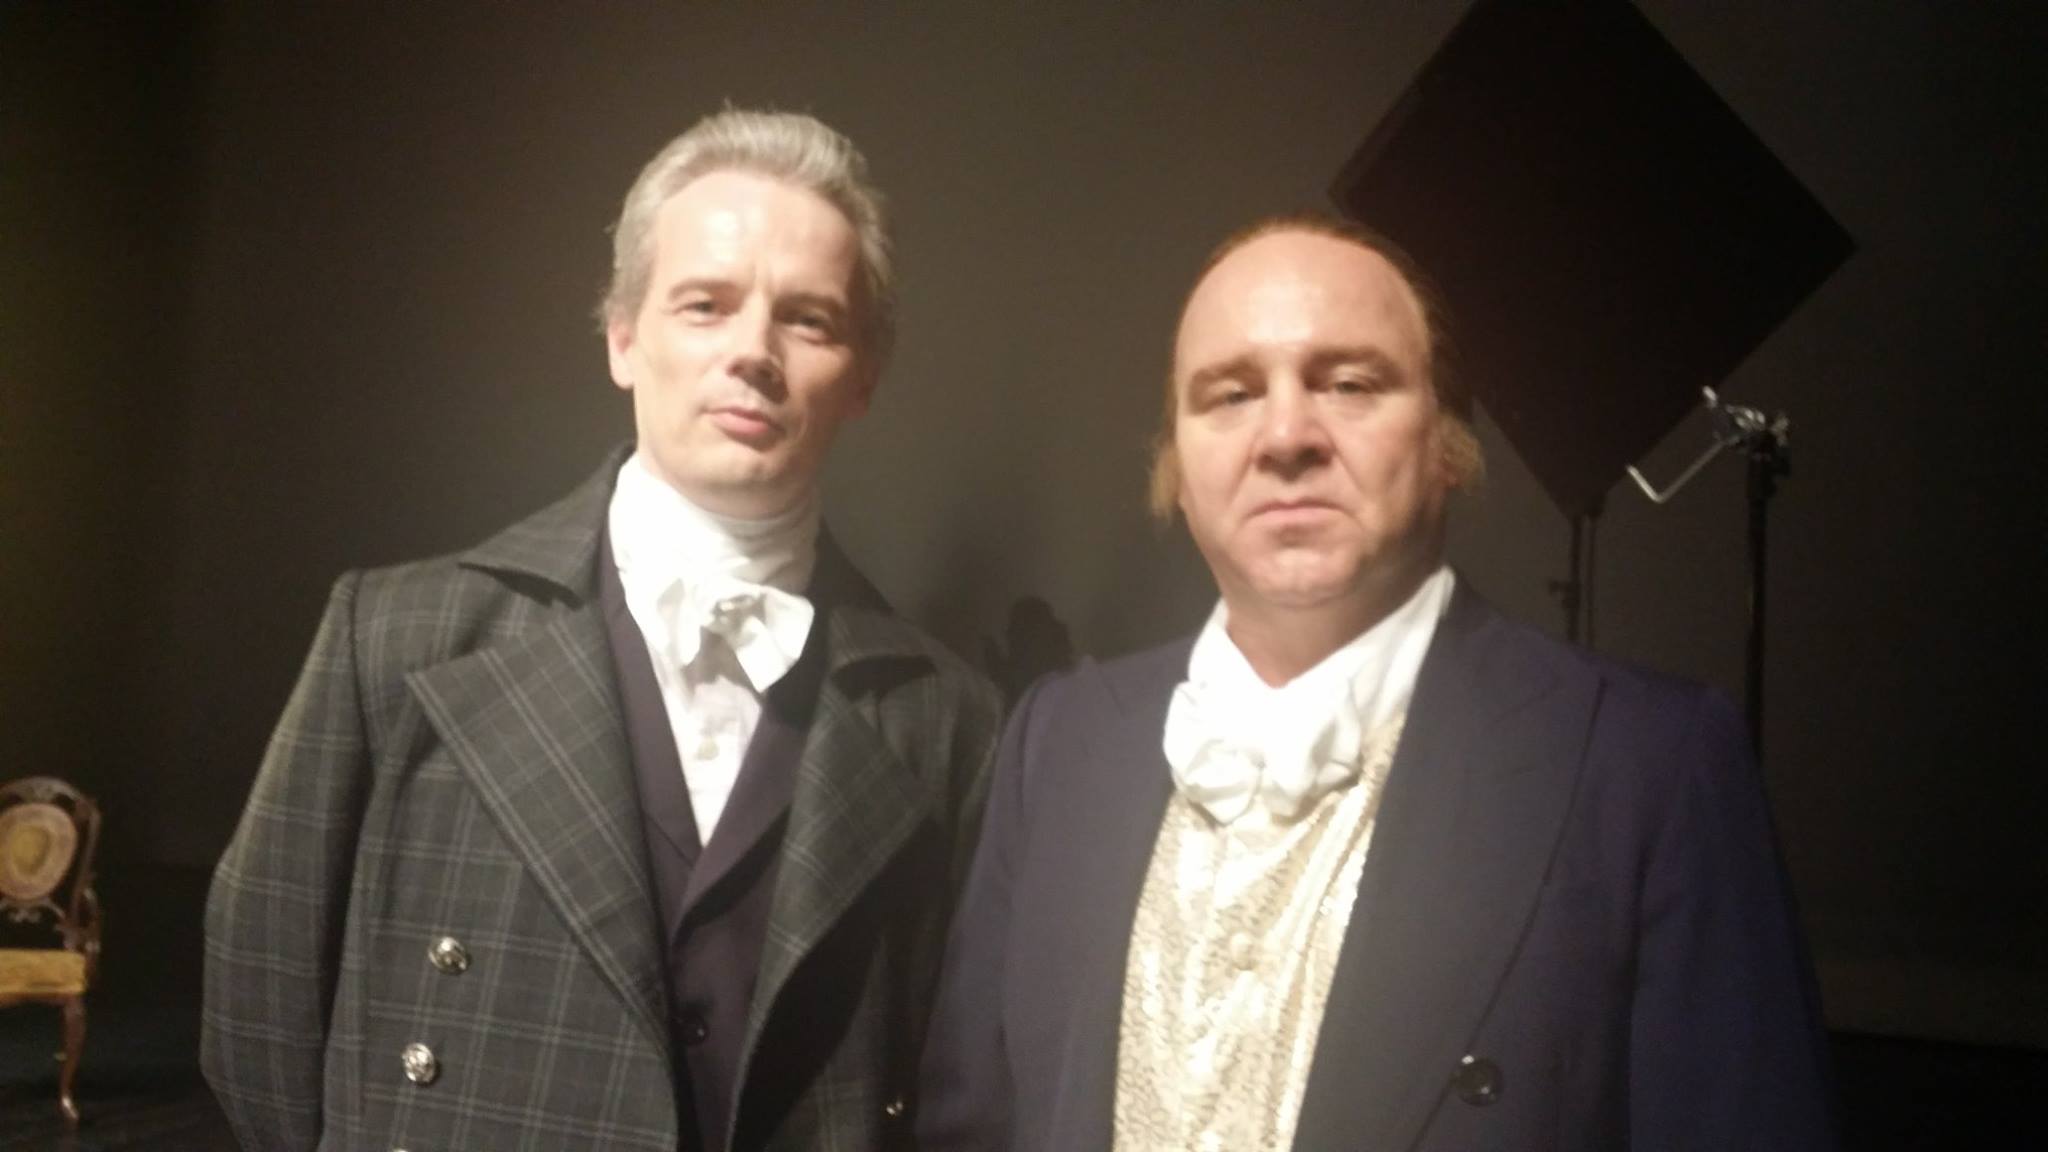 Dean Dawson as Aaron Burr and Liam Lusk as Alexander Hamilton in the upcoming EBS television program, Secrets of Supremacy.